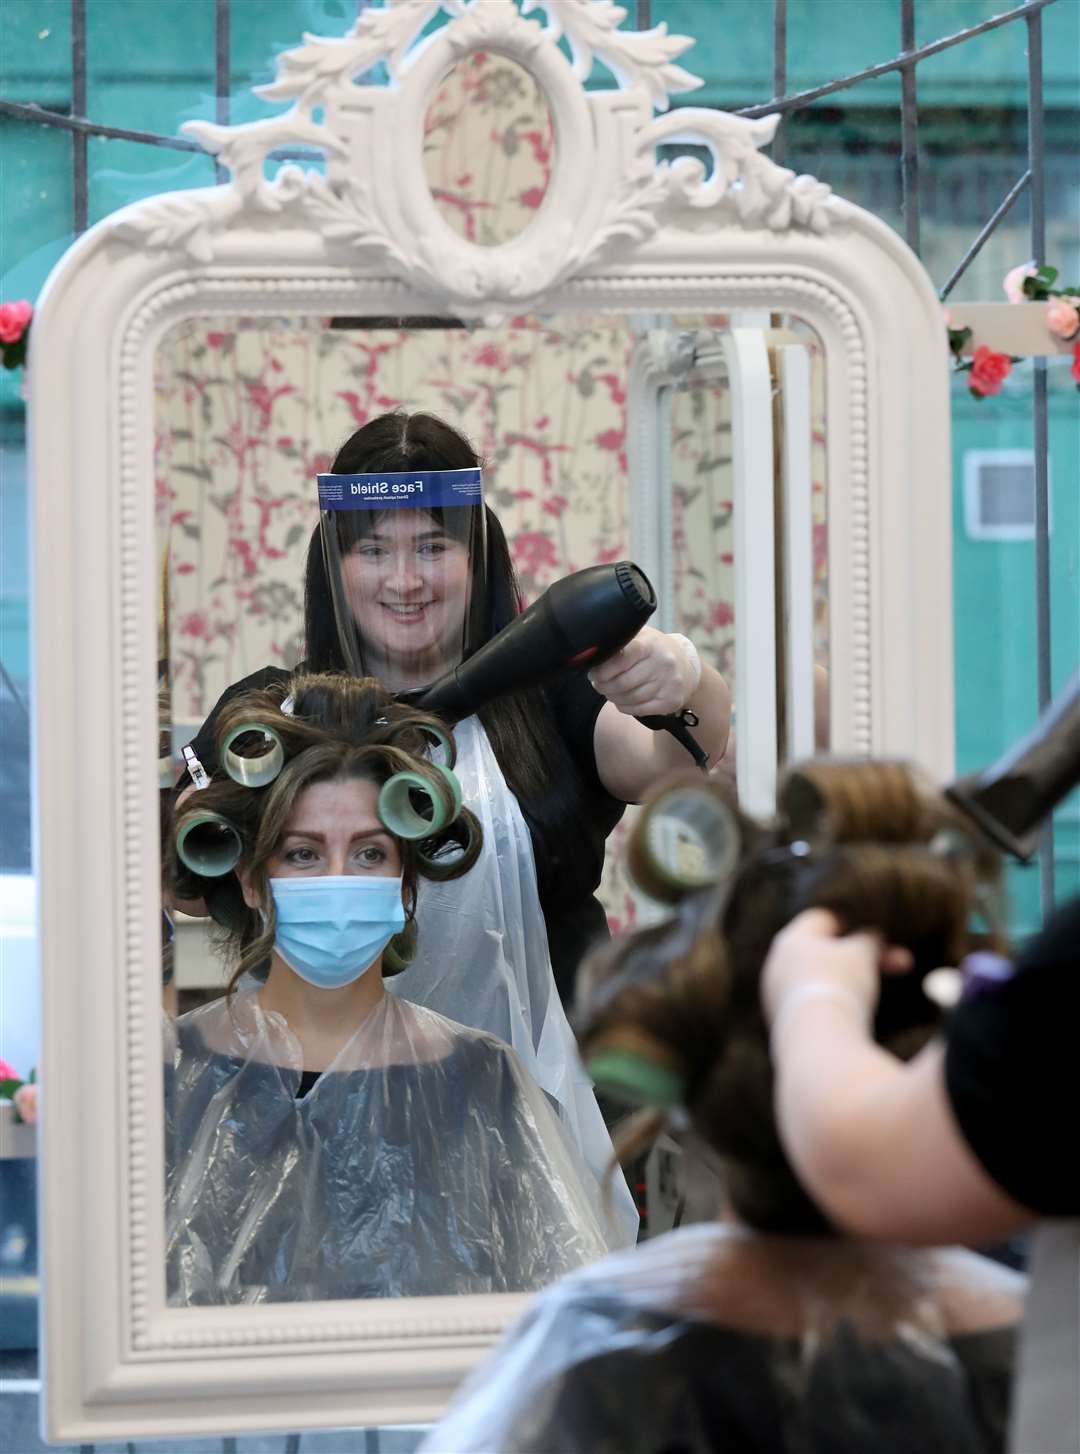 Meanwhile in Scotland, hairdressers are preparing to reopen to customers on Wednesday (Andrew Milligan/PA)